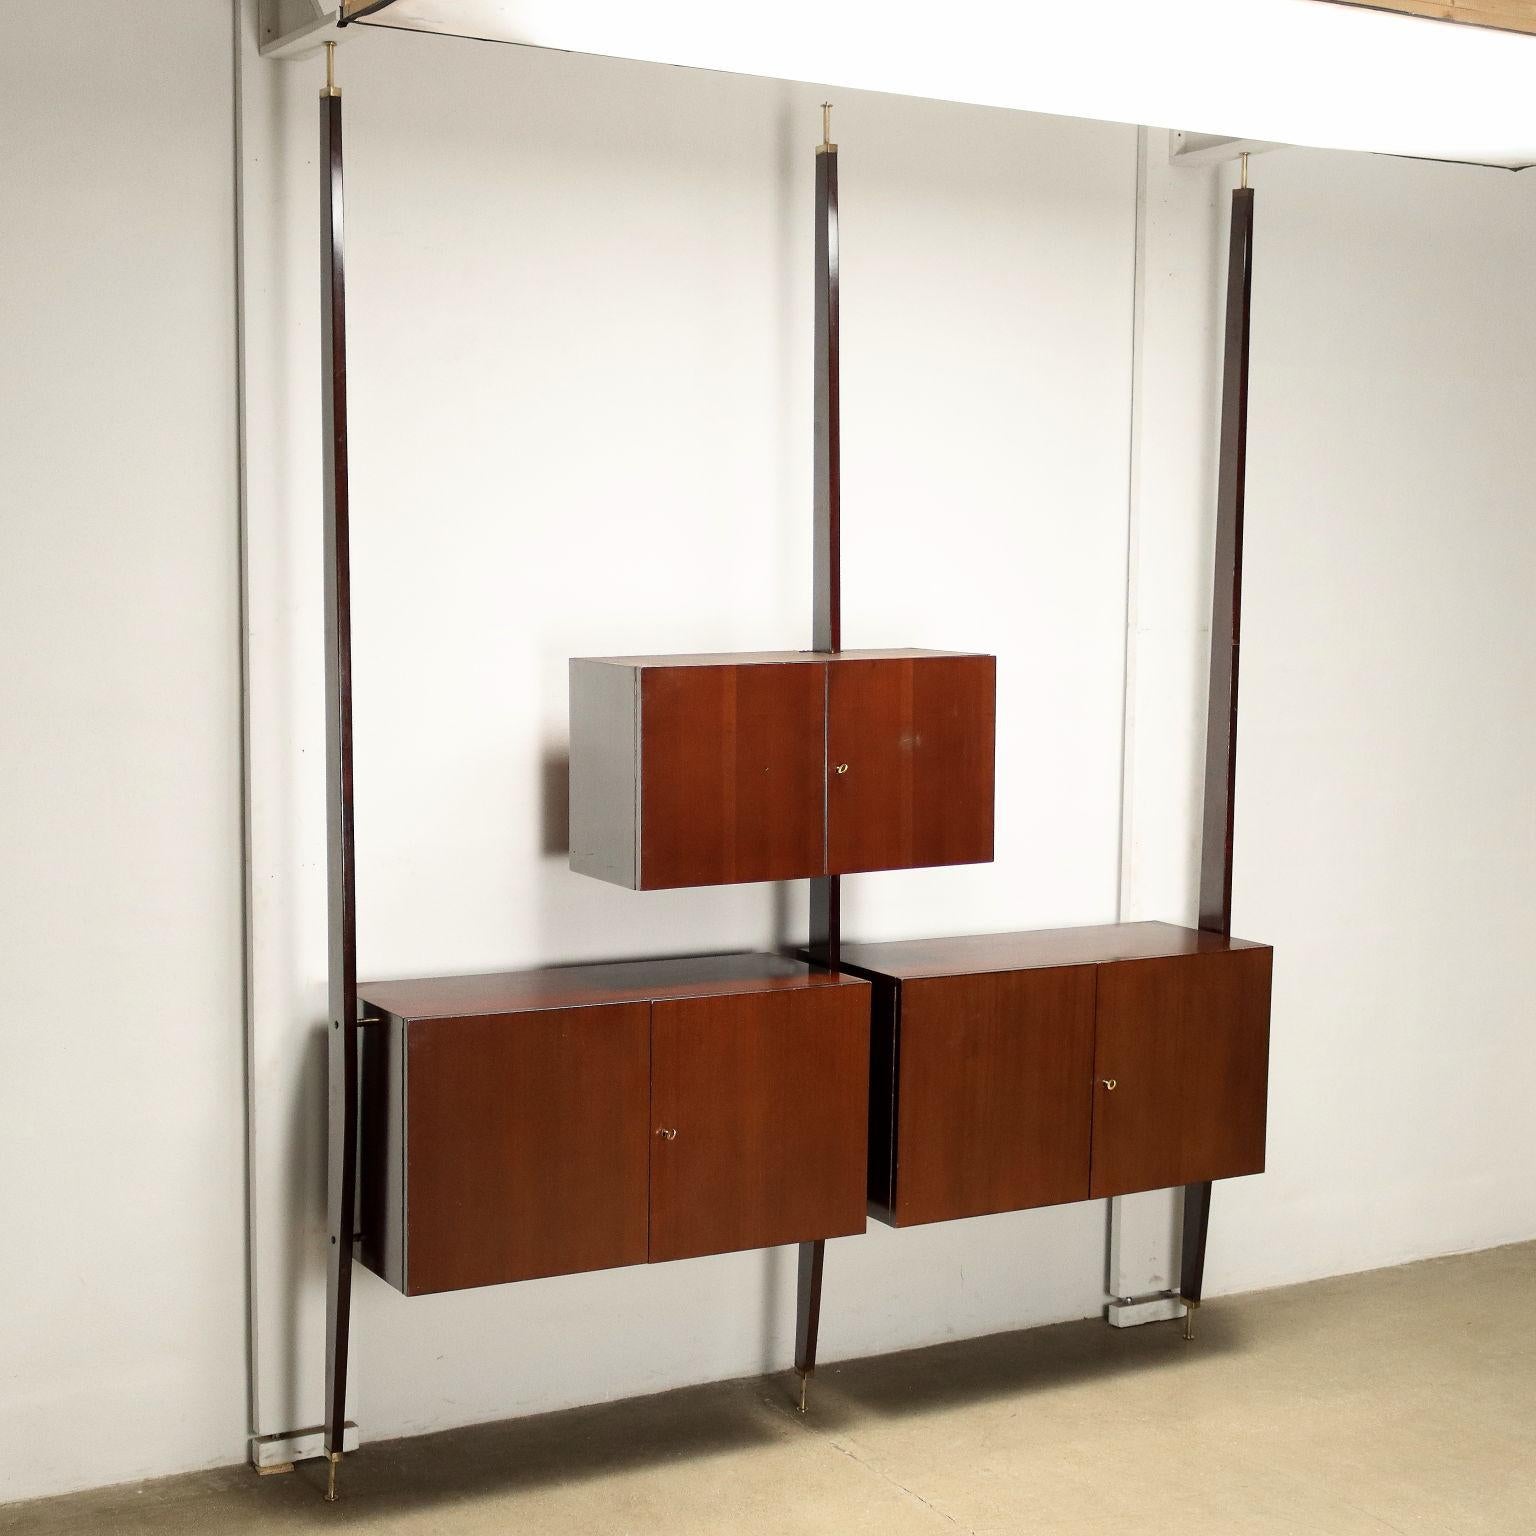 Wall unit with hinged doors in ebony-stained beech veneer.